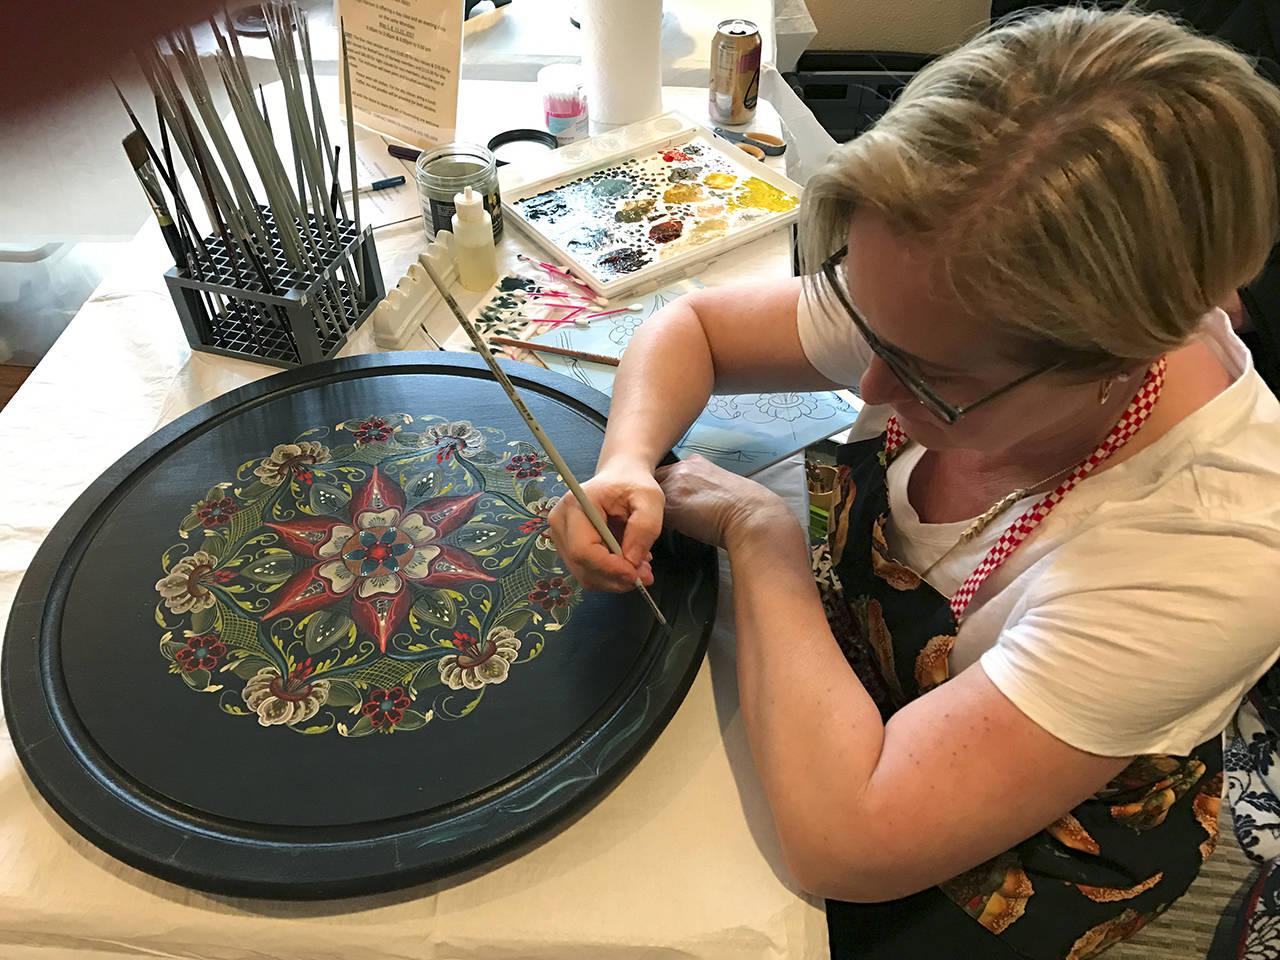 photos Courtesy Kristin Sullivan                                A rosemaling artist demonstrates her work in Bothell during Nordic Heritage Day in March. This form of decorative art originated in the lowland areas of Eastern Norway. Though most often a style of painting, rosemaling appears in carved wood as well.